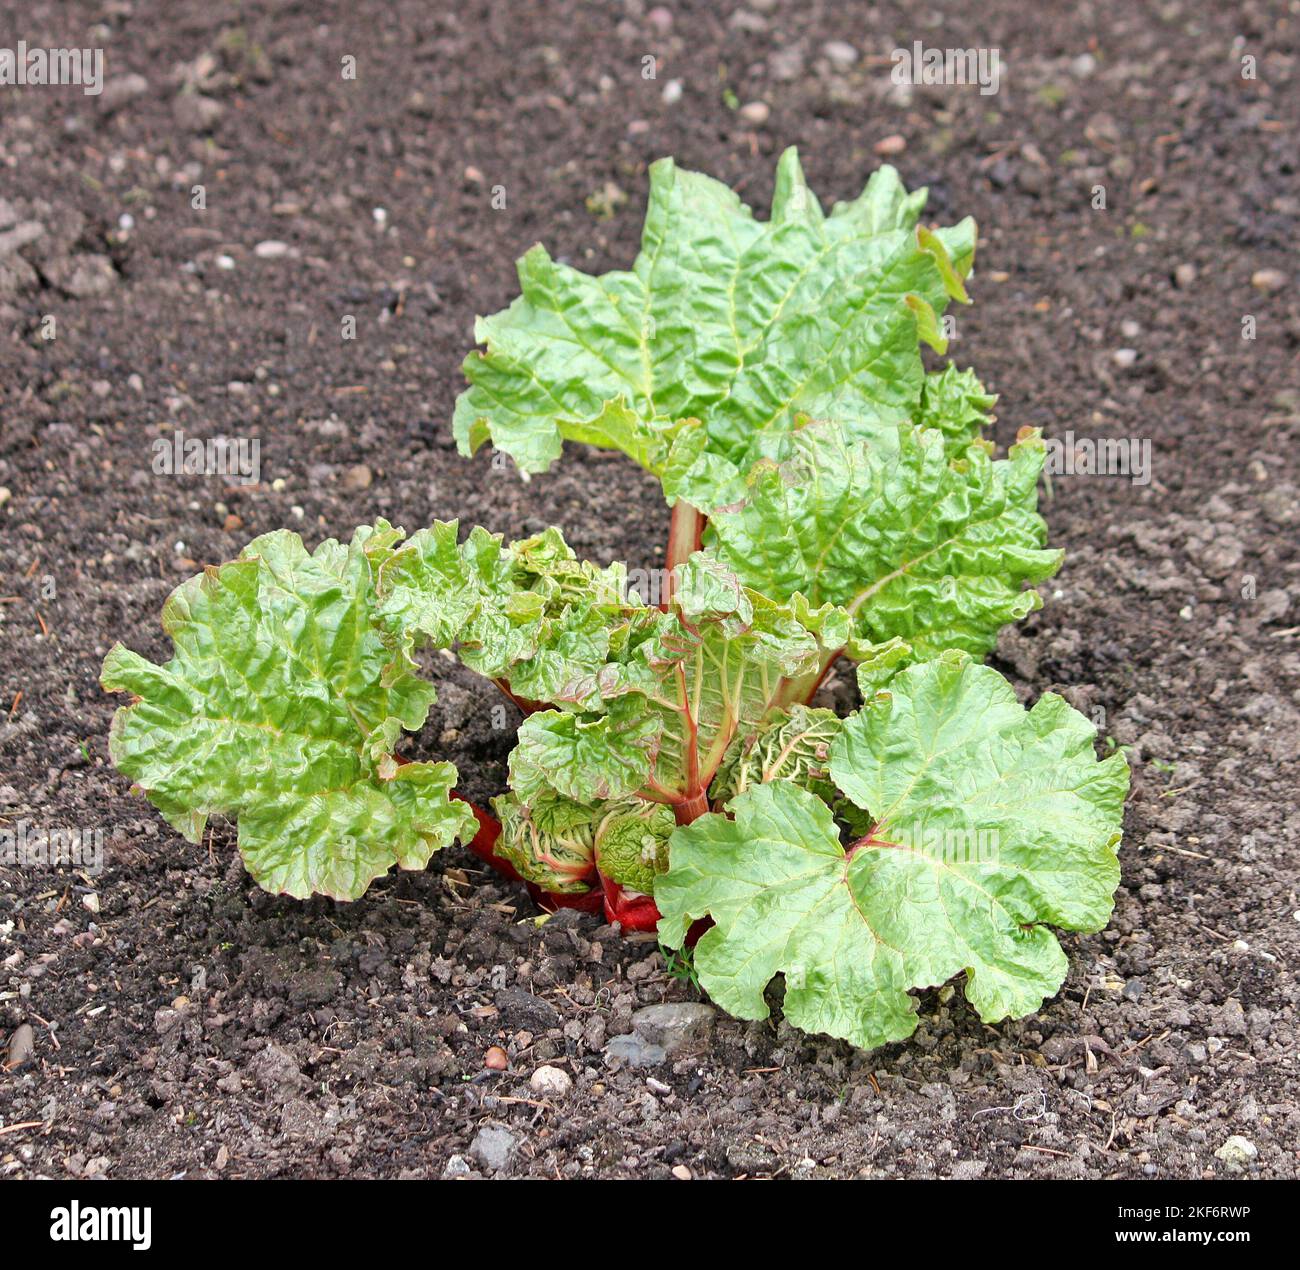 A Young Healthy Rhubarb Plant with Large Green Leaves. Stock Photo